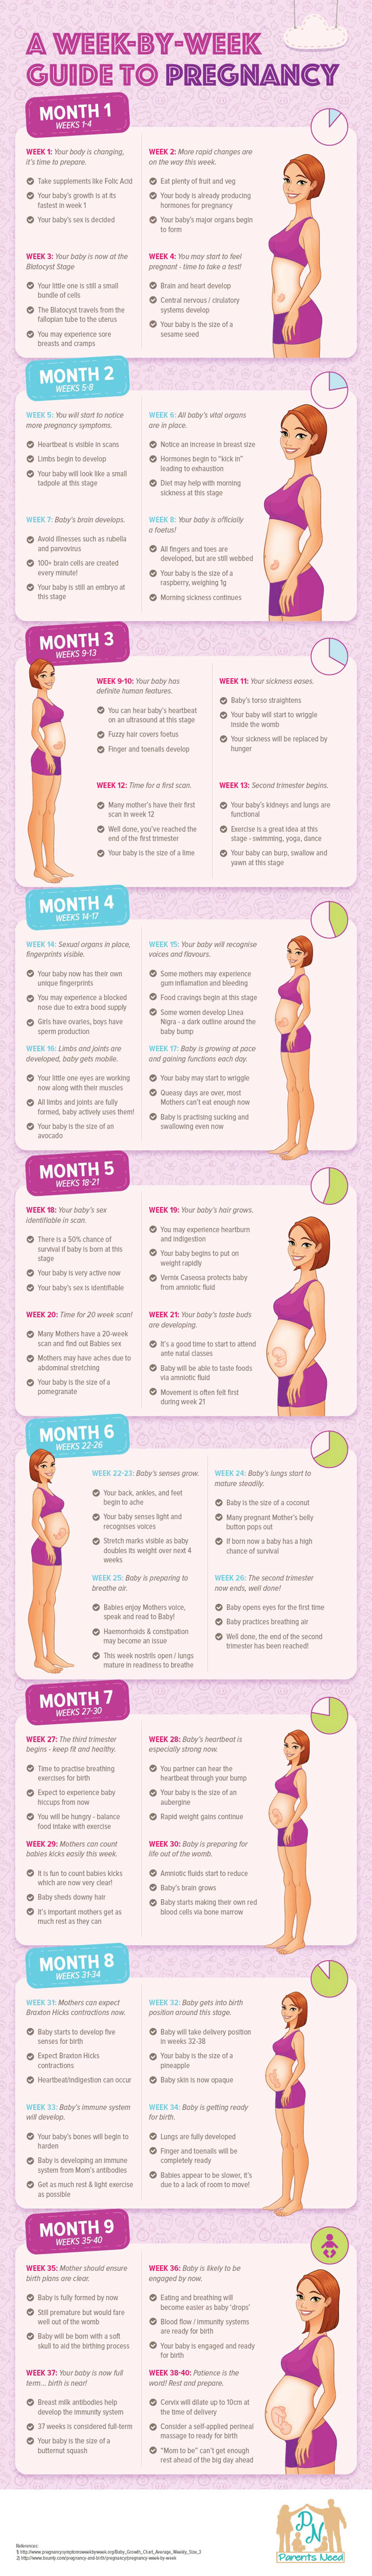 Guide to Pregnancy Week by Week Infographic